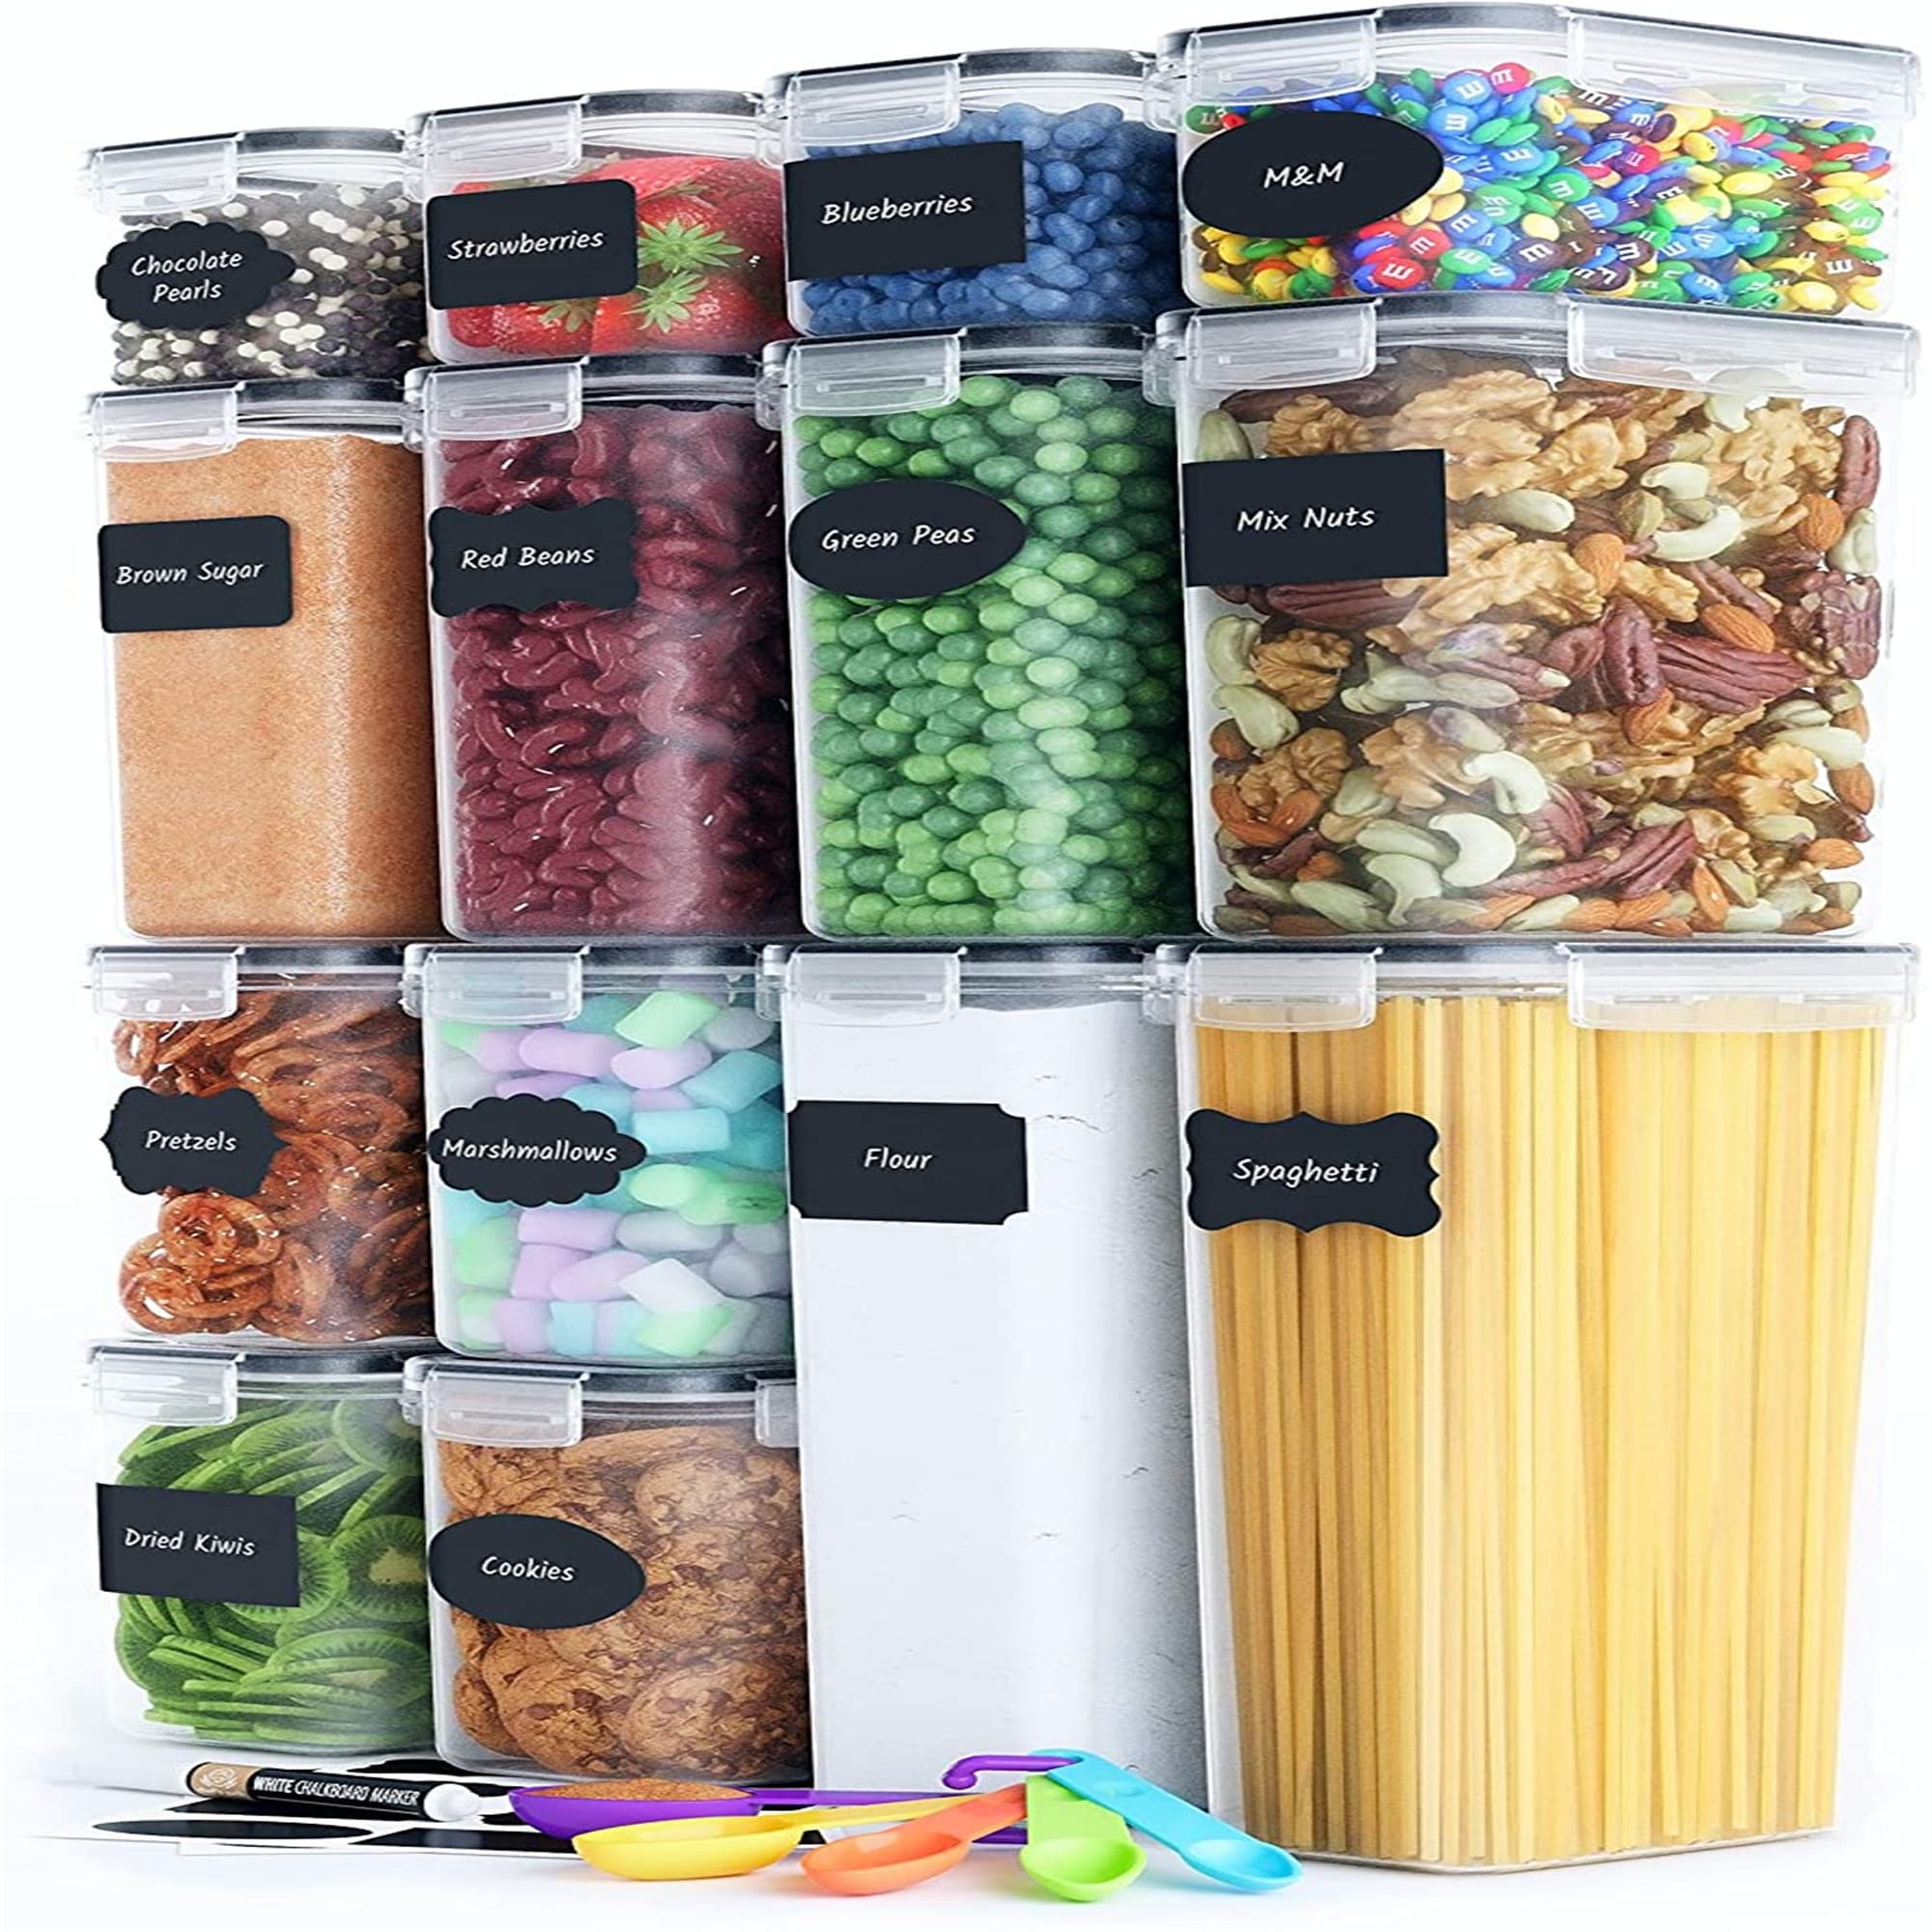 https://ak1.ostkcdn.com/images/products/is/images/direct/a7b75e41d82c699492292182689468fa15da24e9/Airtight-Food-Storage-Container-Set-14-PC-Kitchen-%26-Pantry-Organization-BPA-Free-Plastic-Canisters-with-Durable-Lids-Ideal.jpg